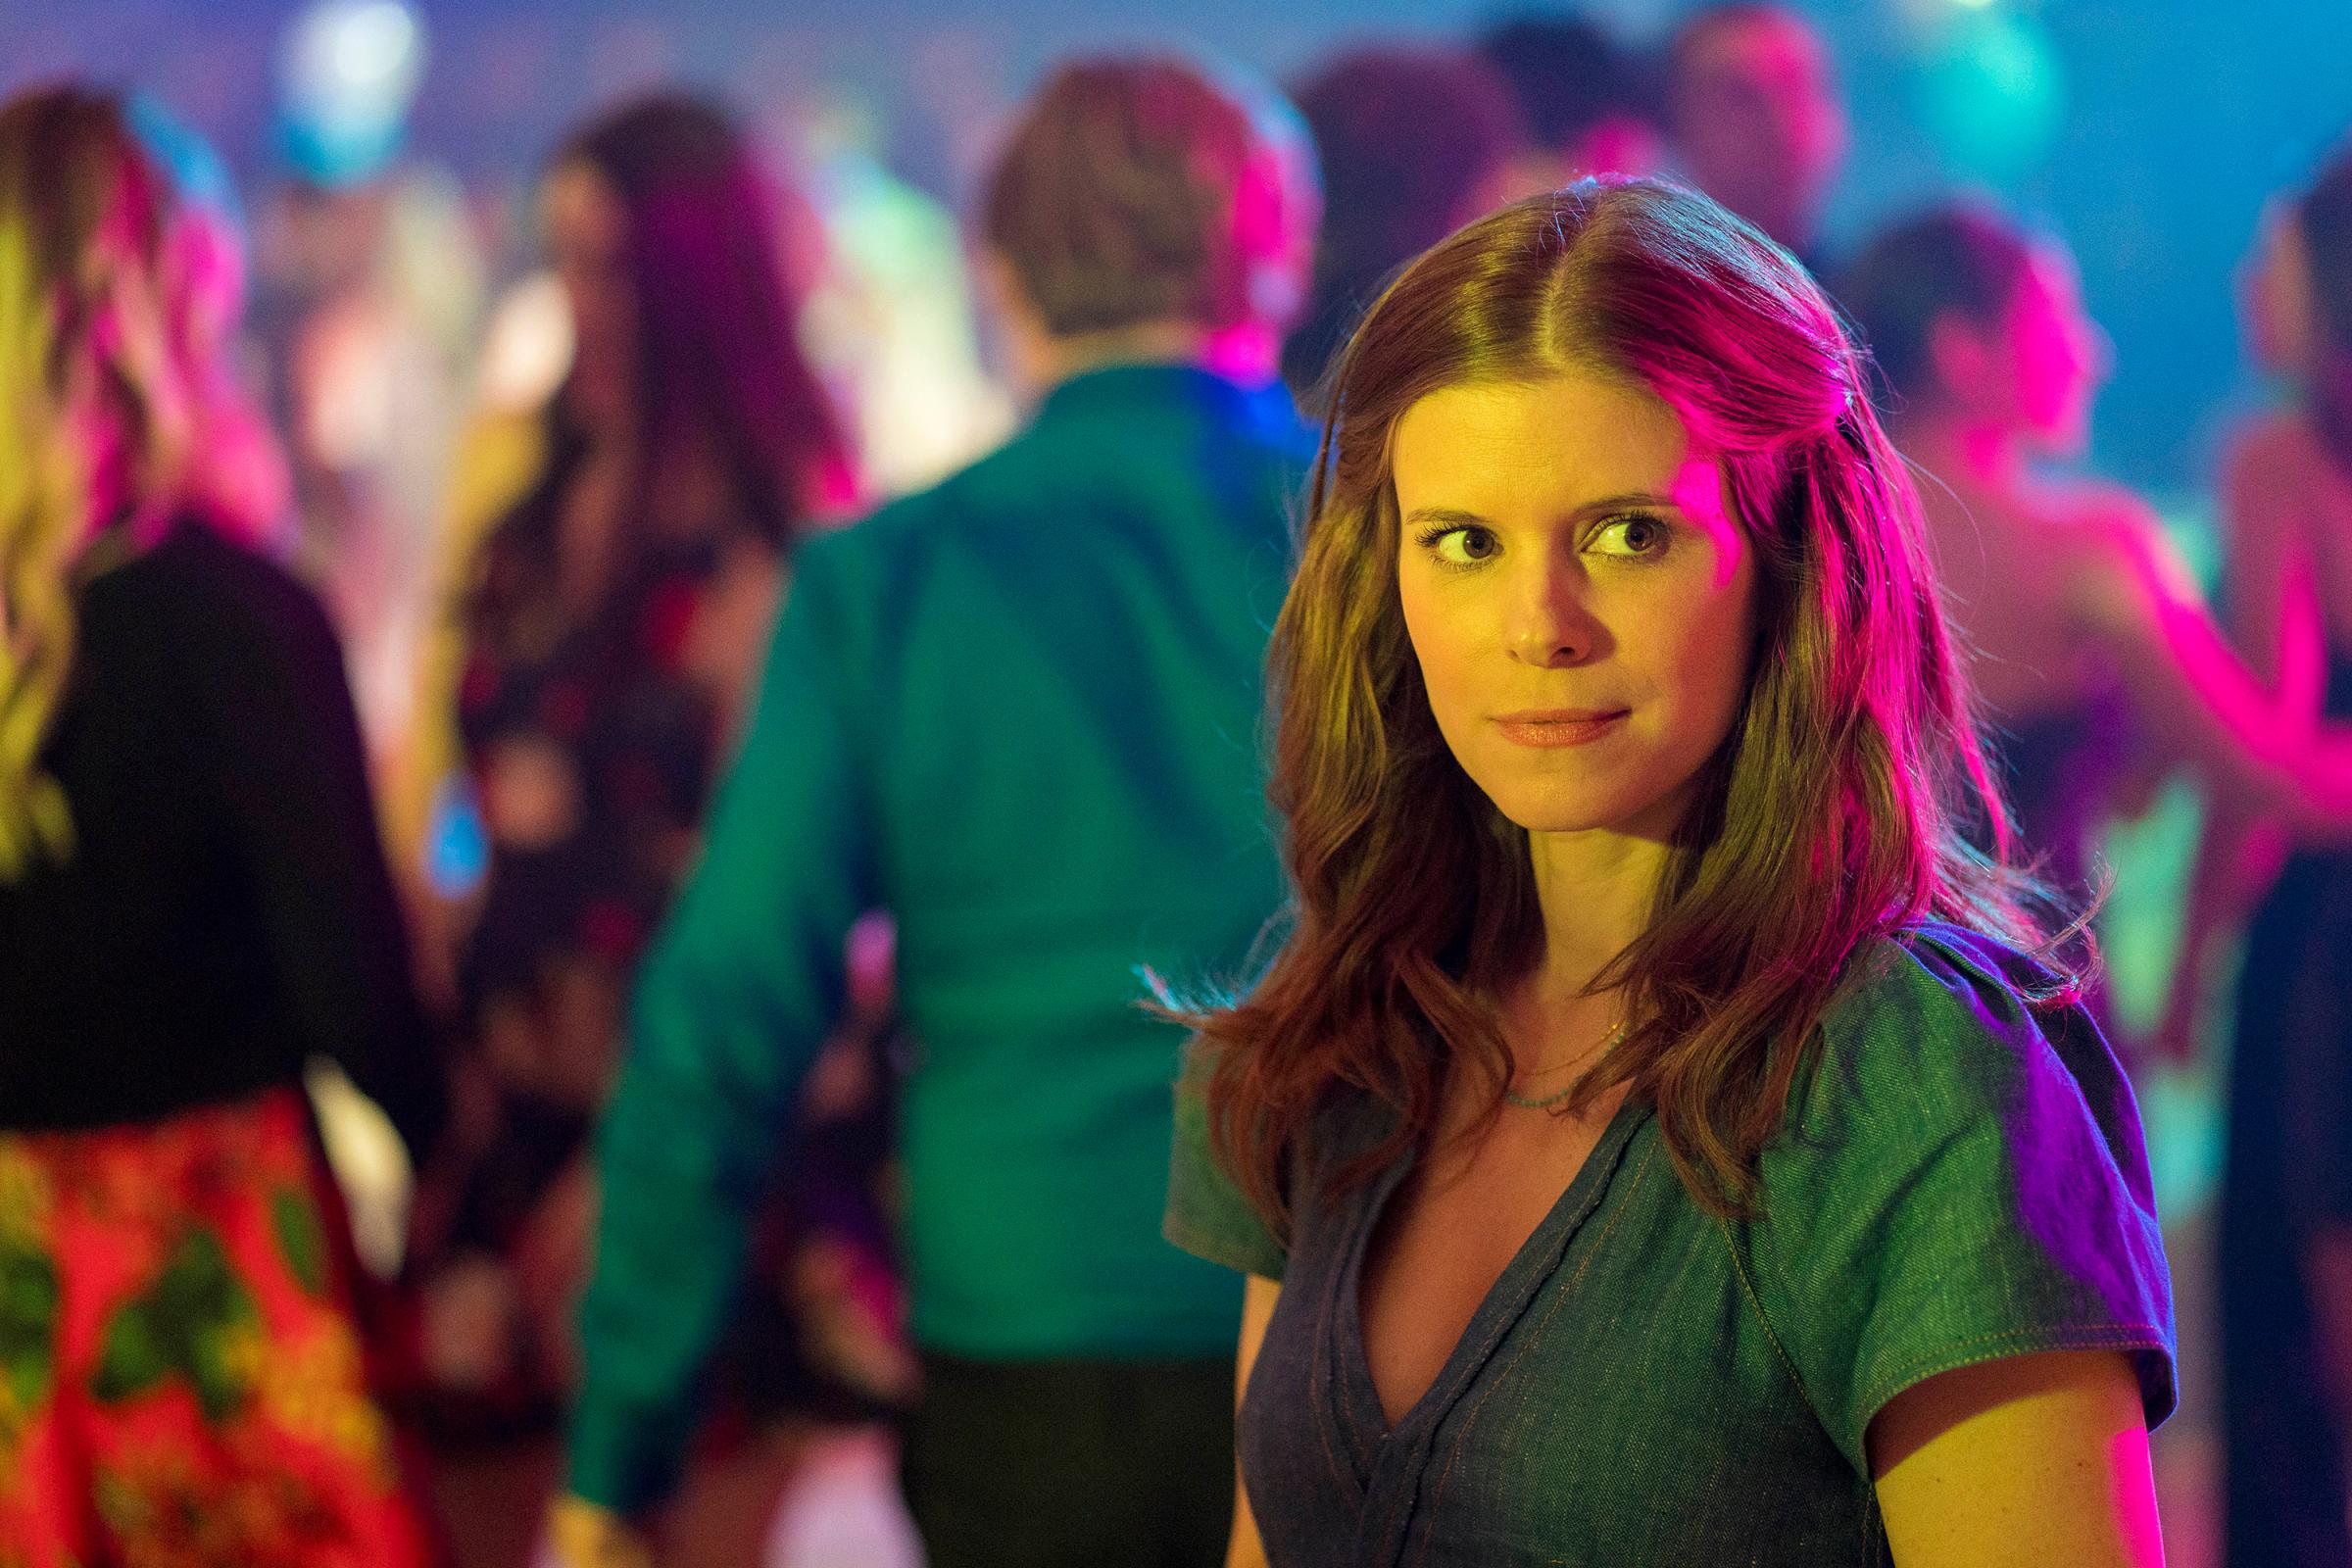 A TEACHER "Episode 3” (Airs Tuesday, November 10) - - Pictured: Kate Mara as Claire Wilson. CR: Chris Large/FX